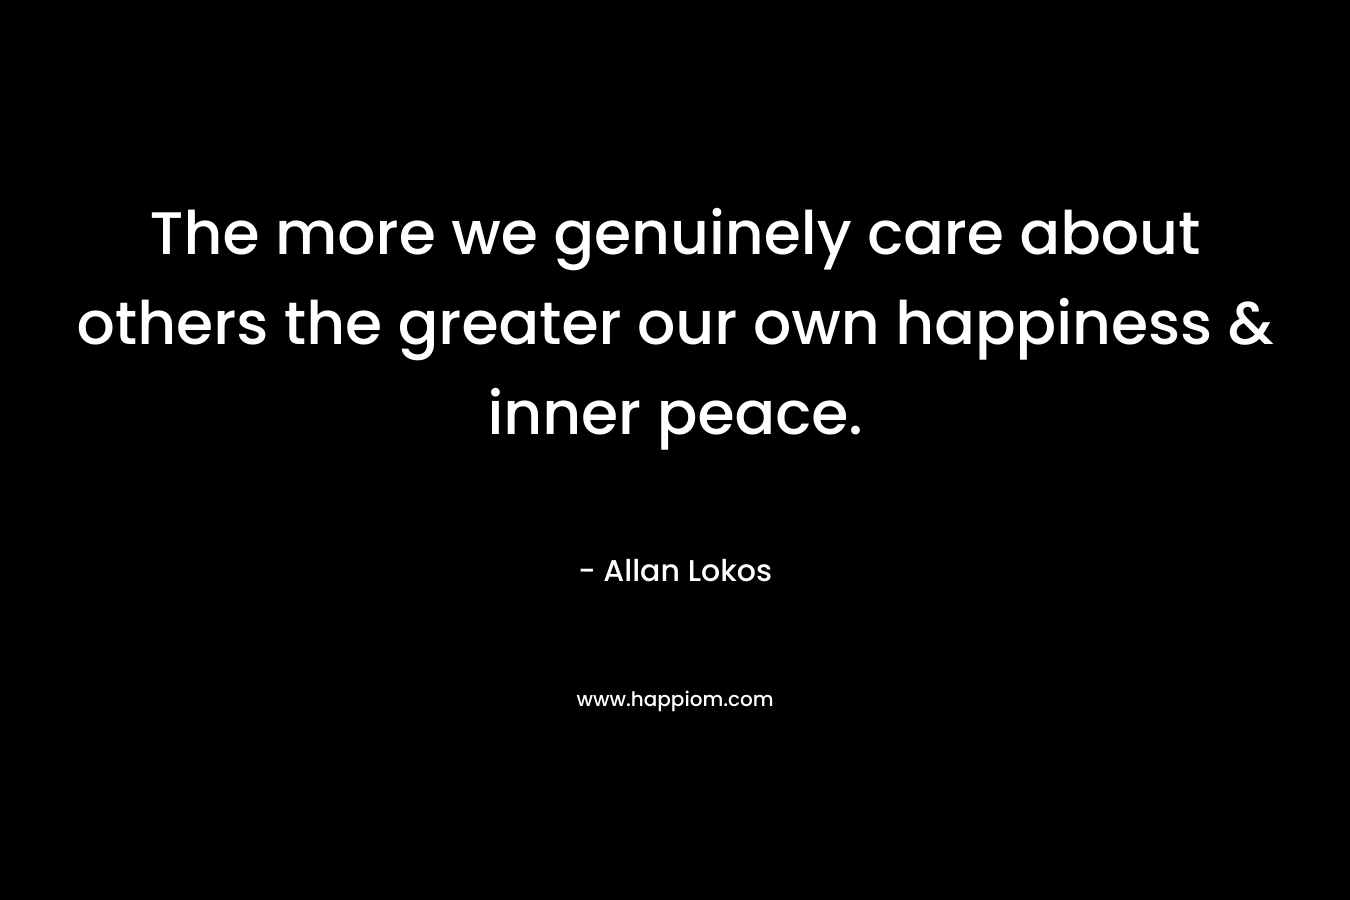 The more we genuinely care about others the greater our own happiness & inner peace.